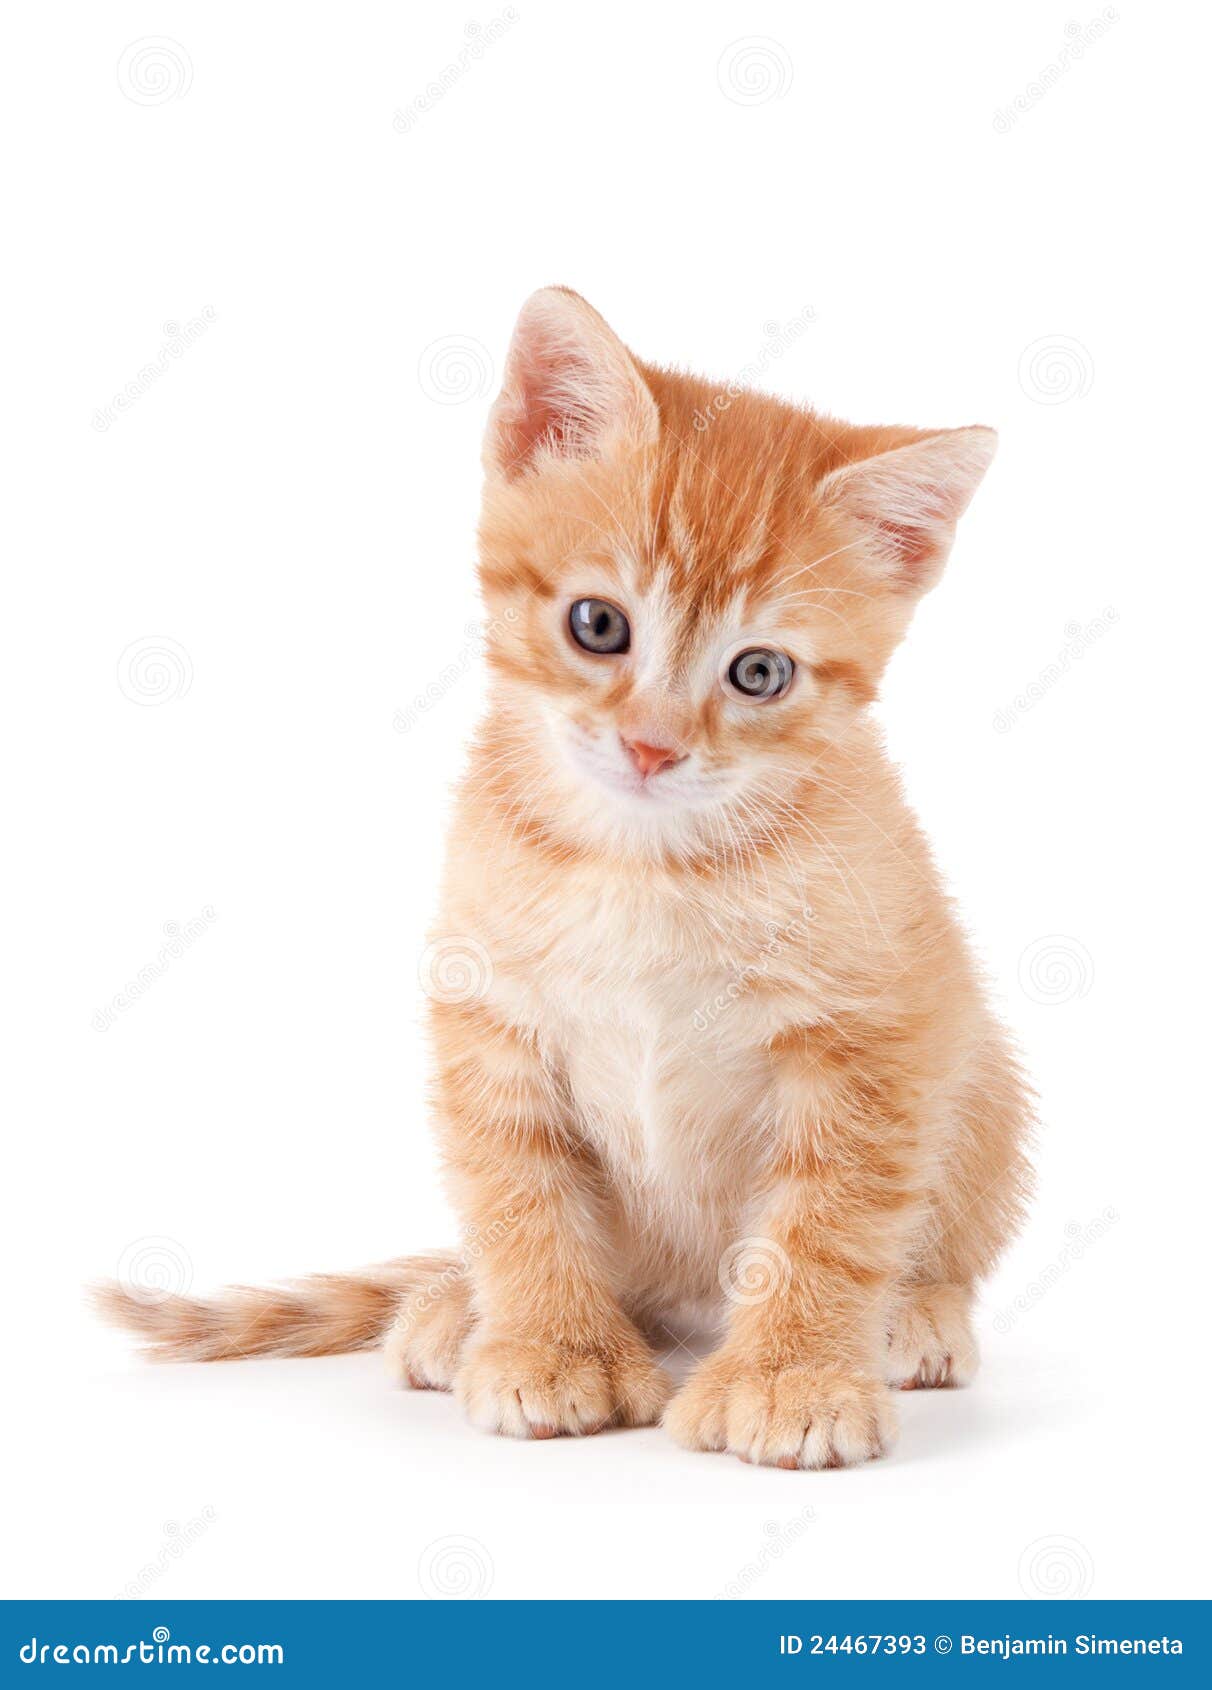 Cute Orange Kitten with Large Paws. Stock Image - Image of hair ...